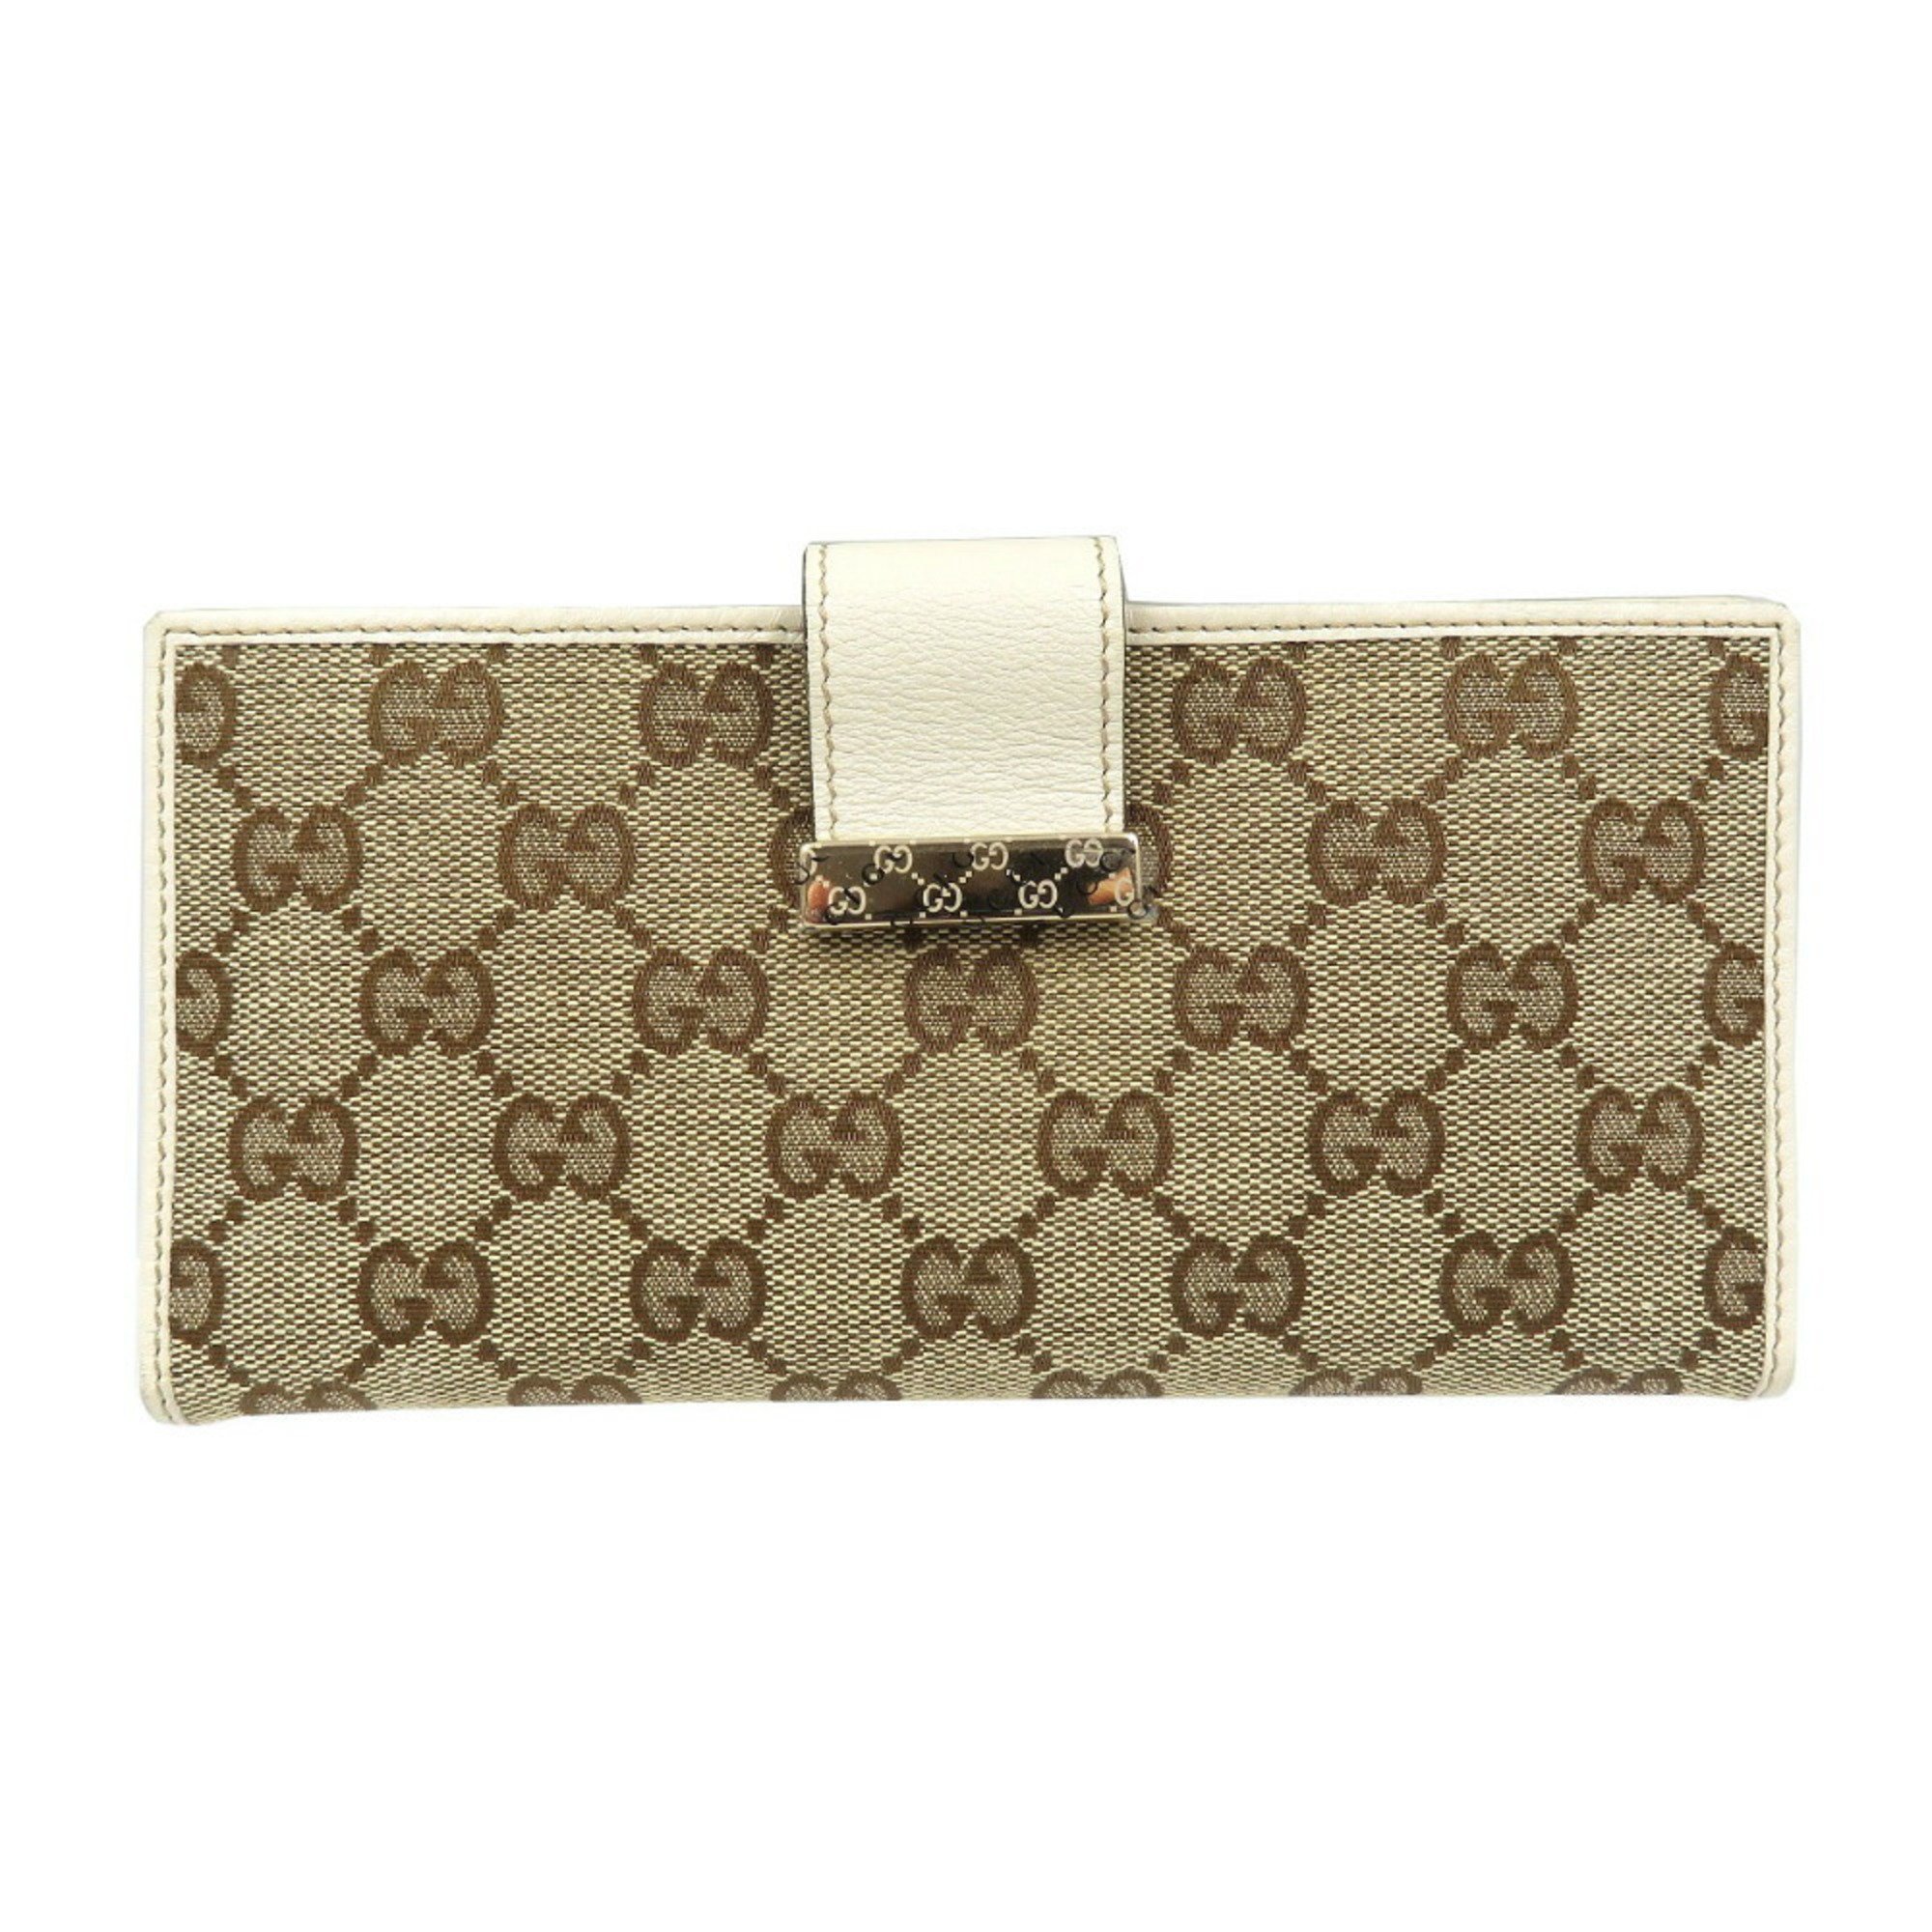 Gucci Continental Wallet 212096 GG Canvas Beige Long 0081GUCCI